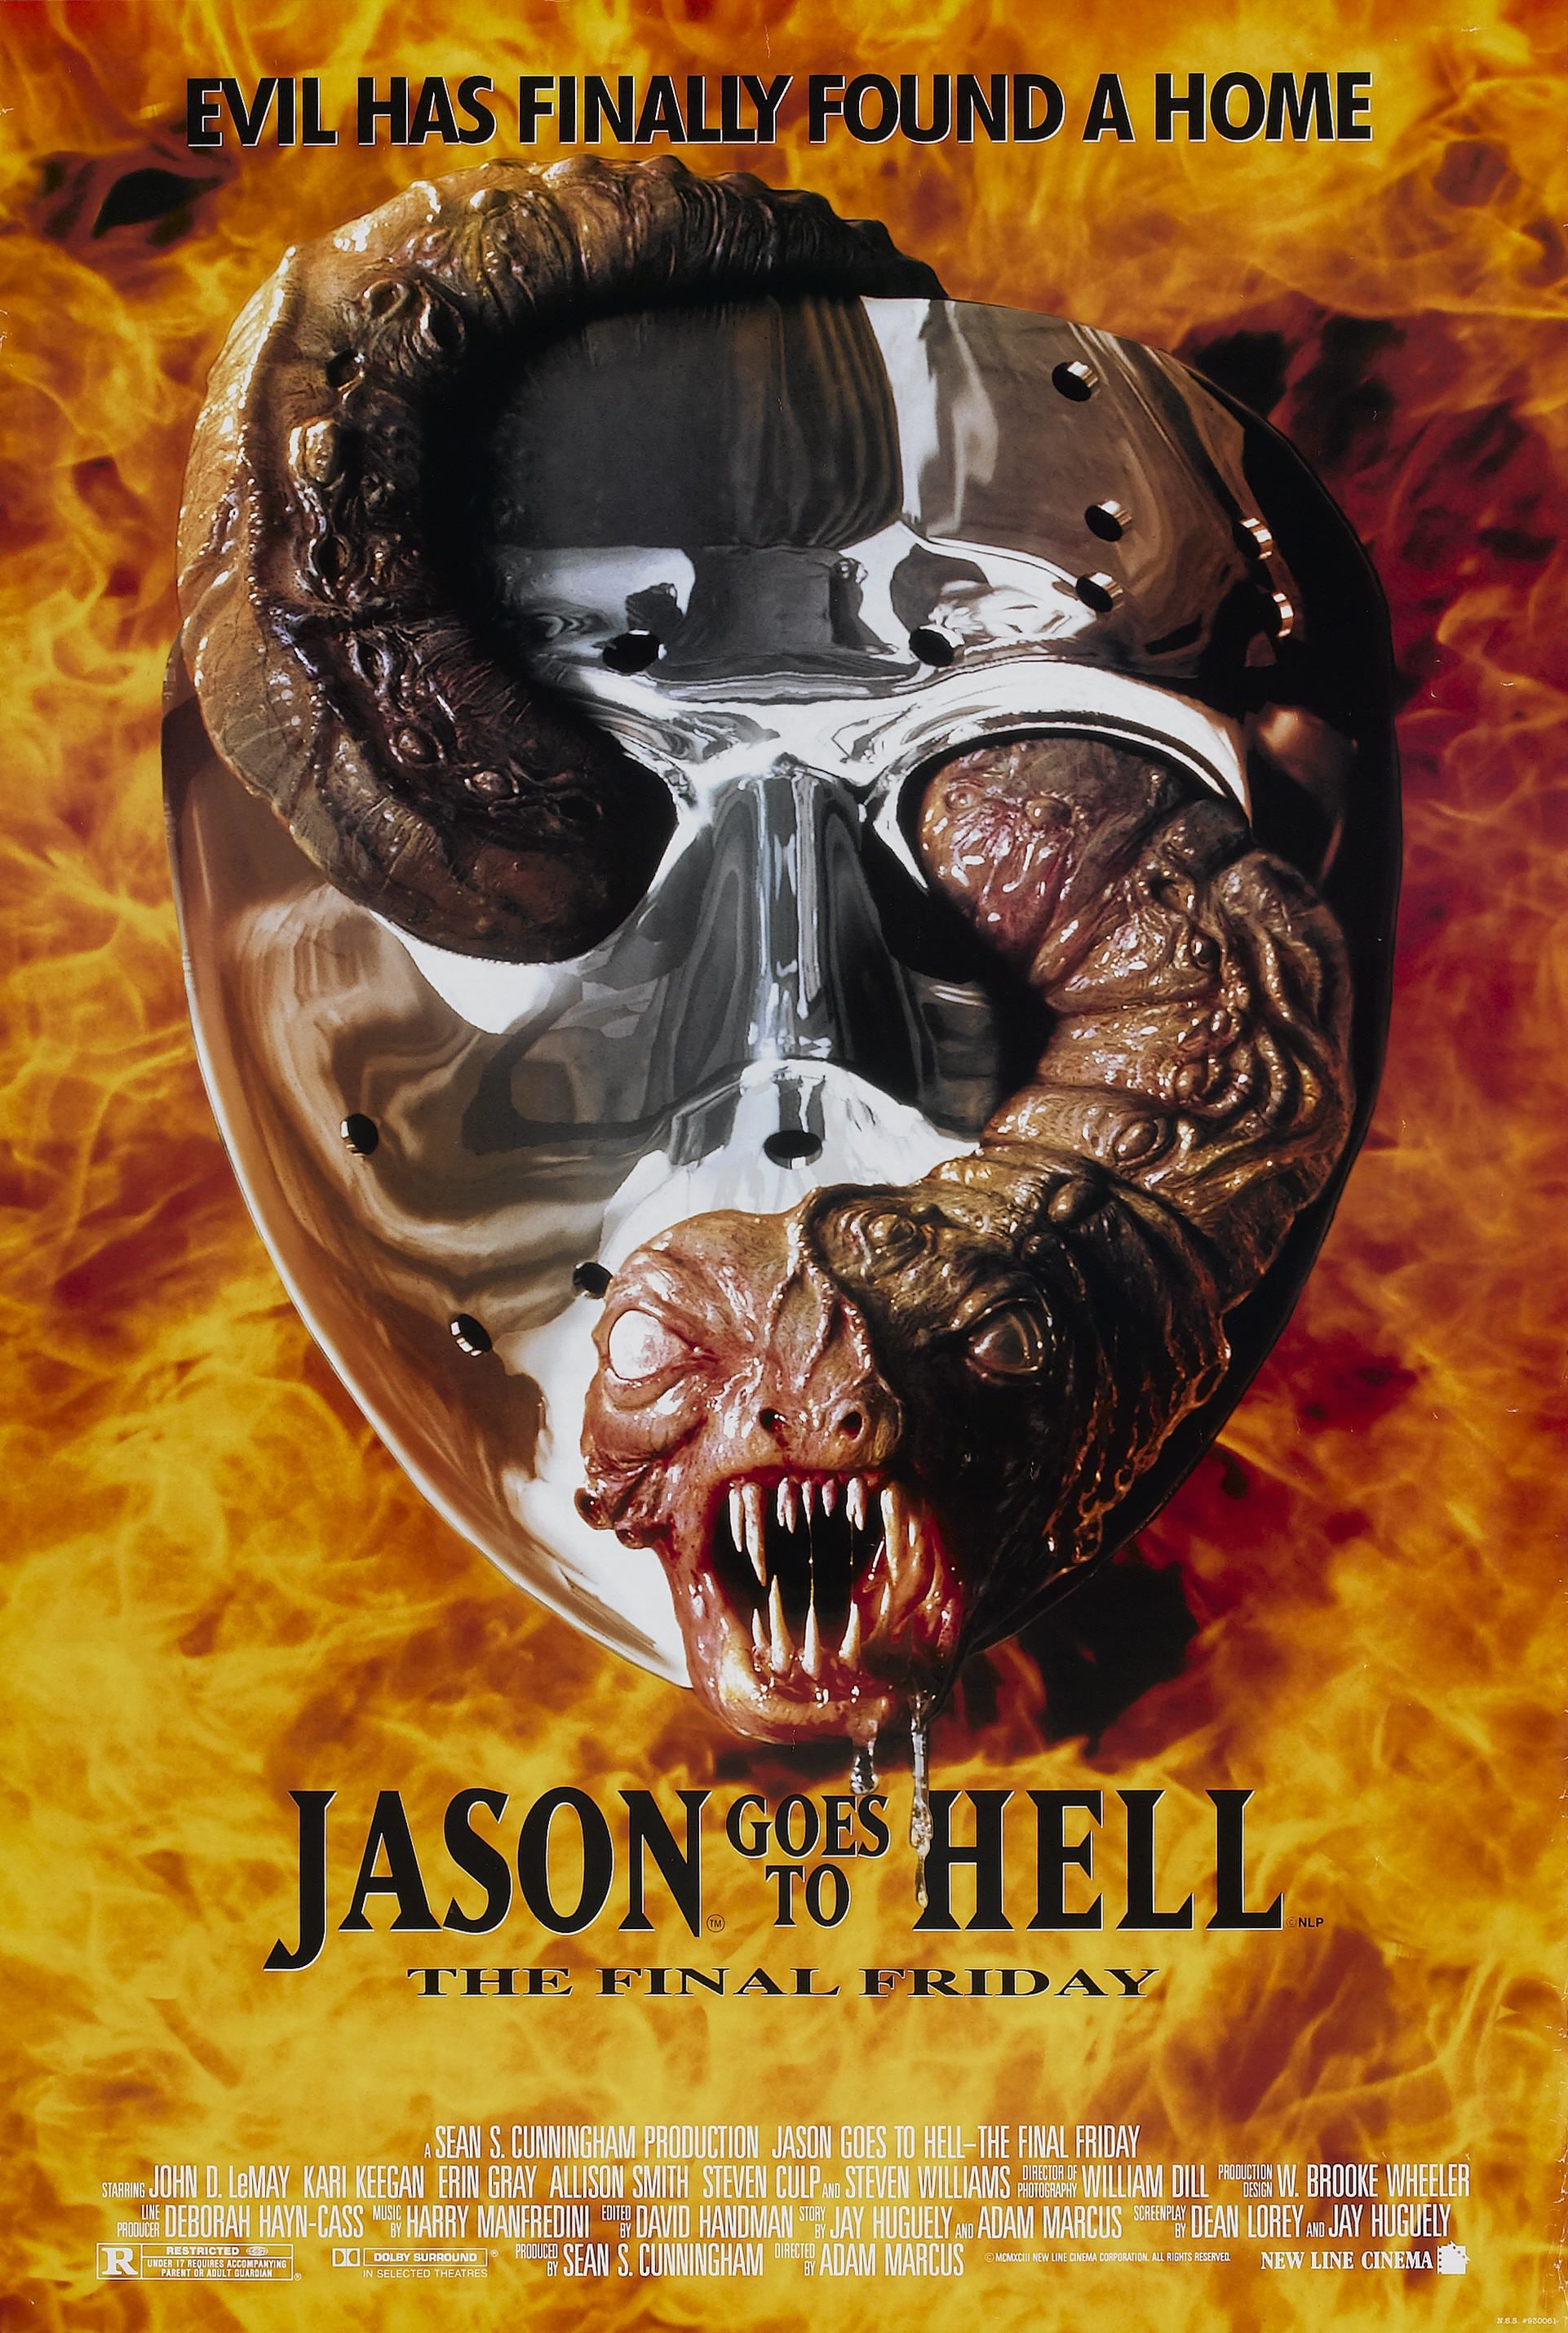 Amazoncom: Friday The 13Th Blu-ray: Victor Miller, Sean